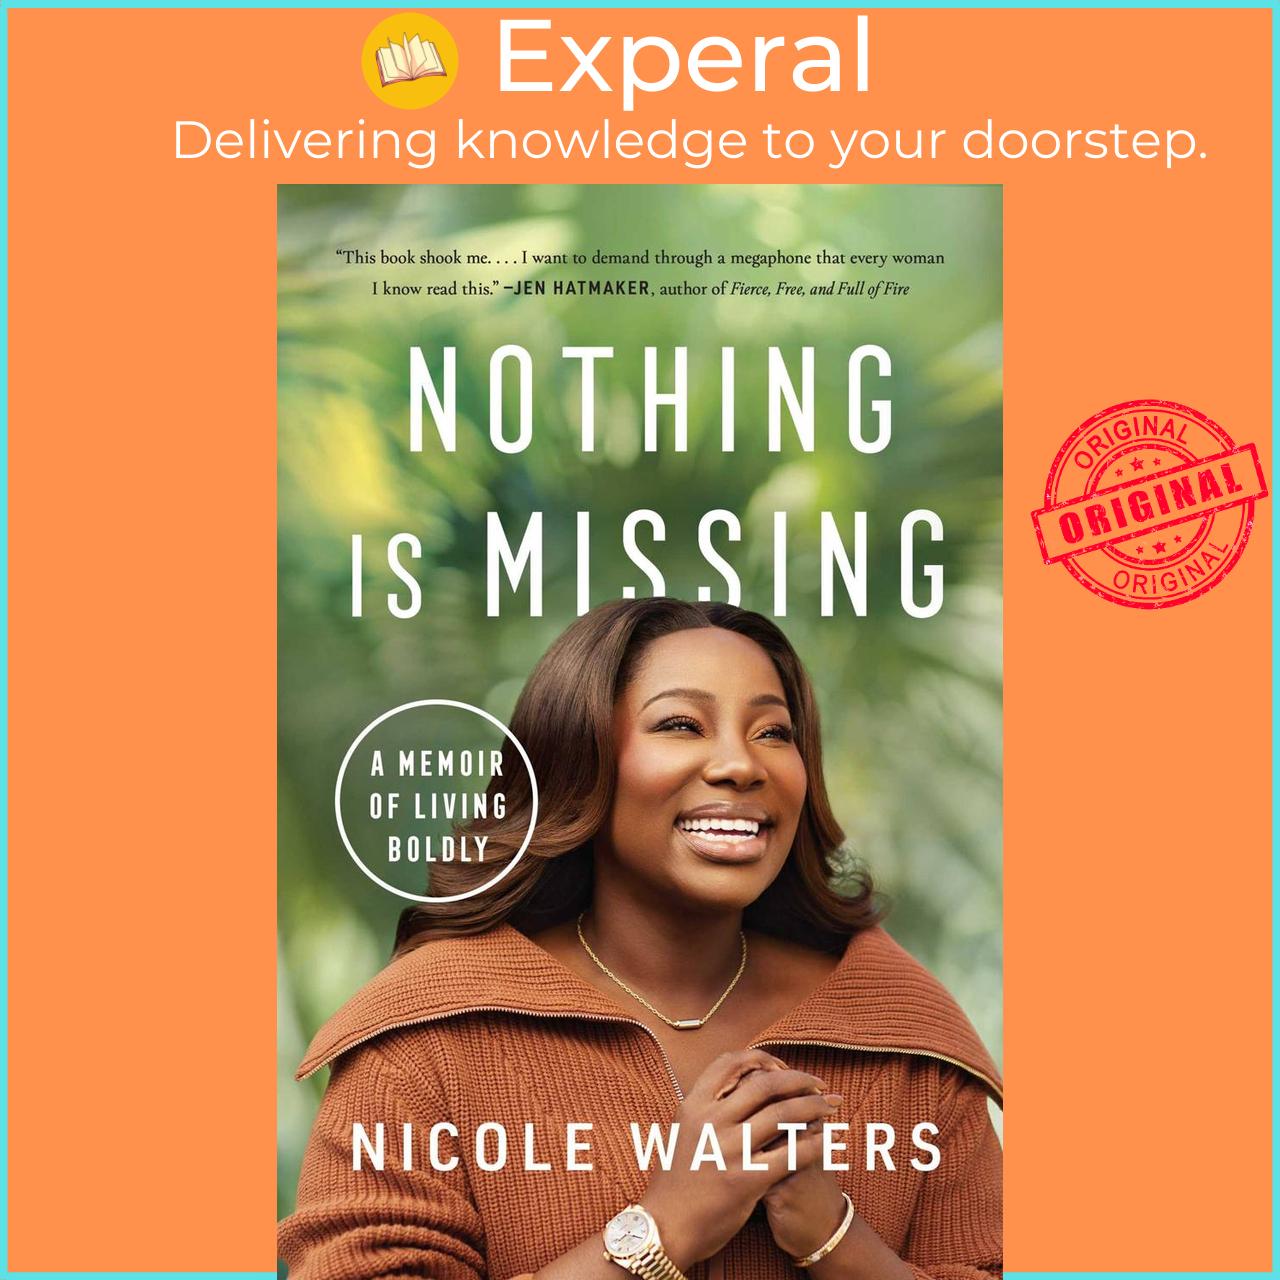 Sách - Nothing Is Missing - A Memoir of Living Boldly by Nicole Walters (US edition, hardcover)